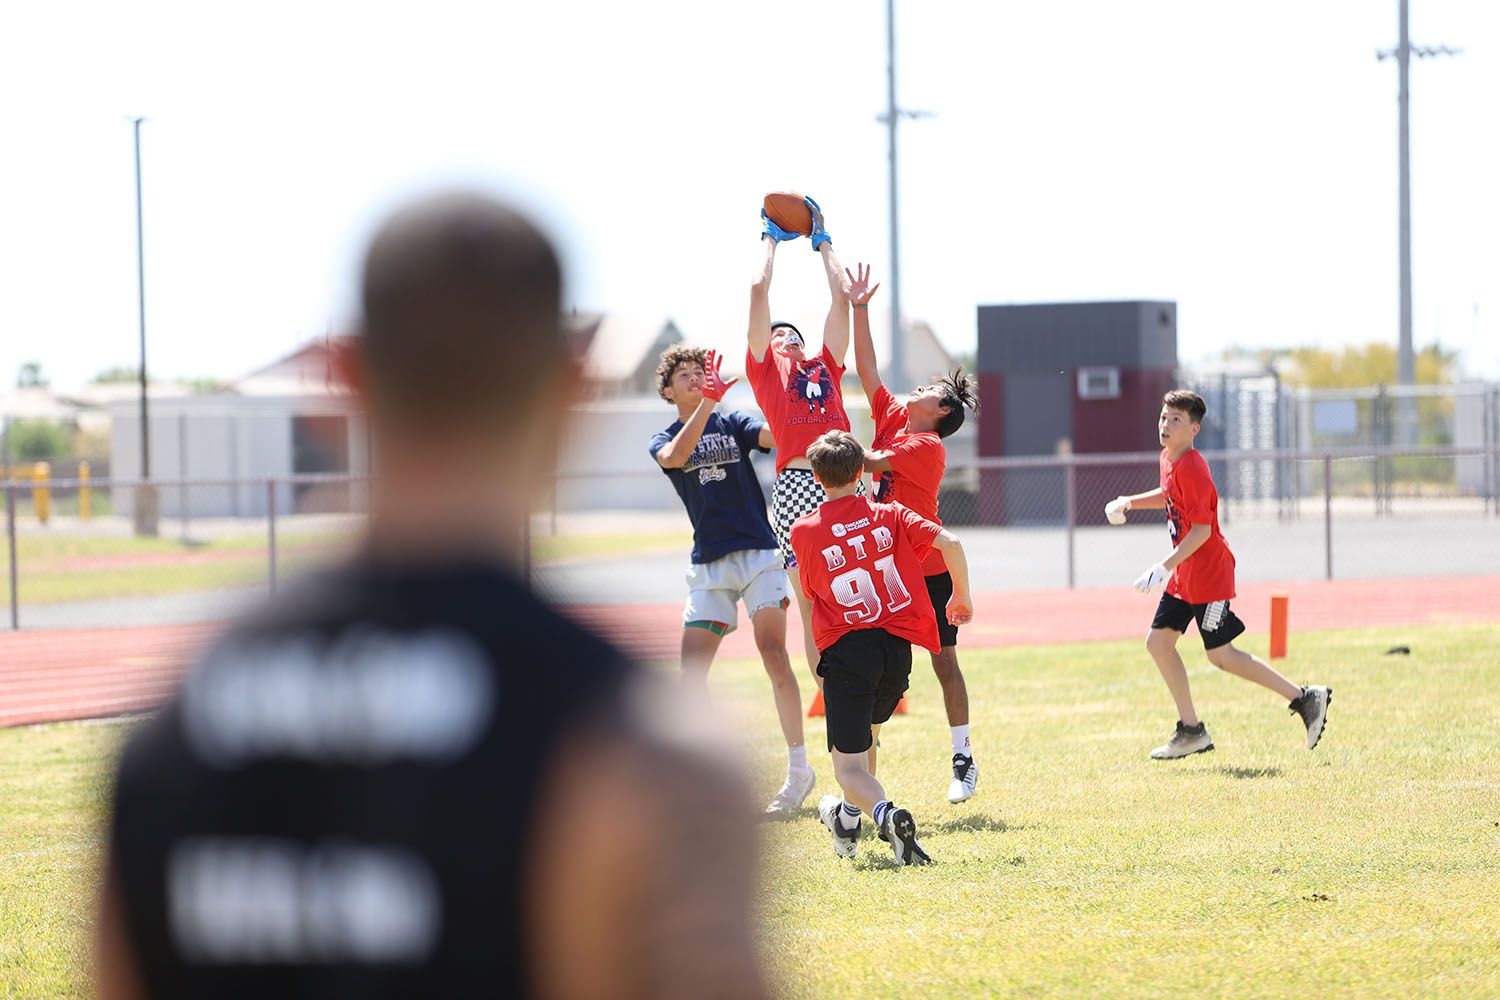 Camper going up for a contested catch